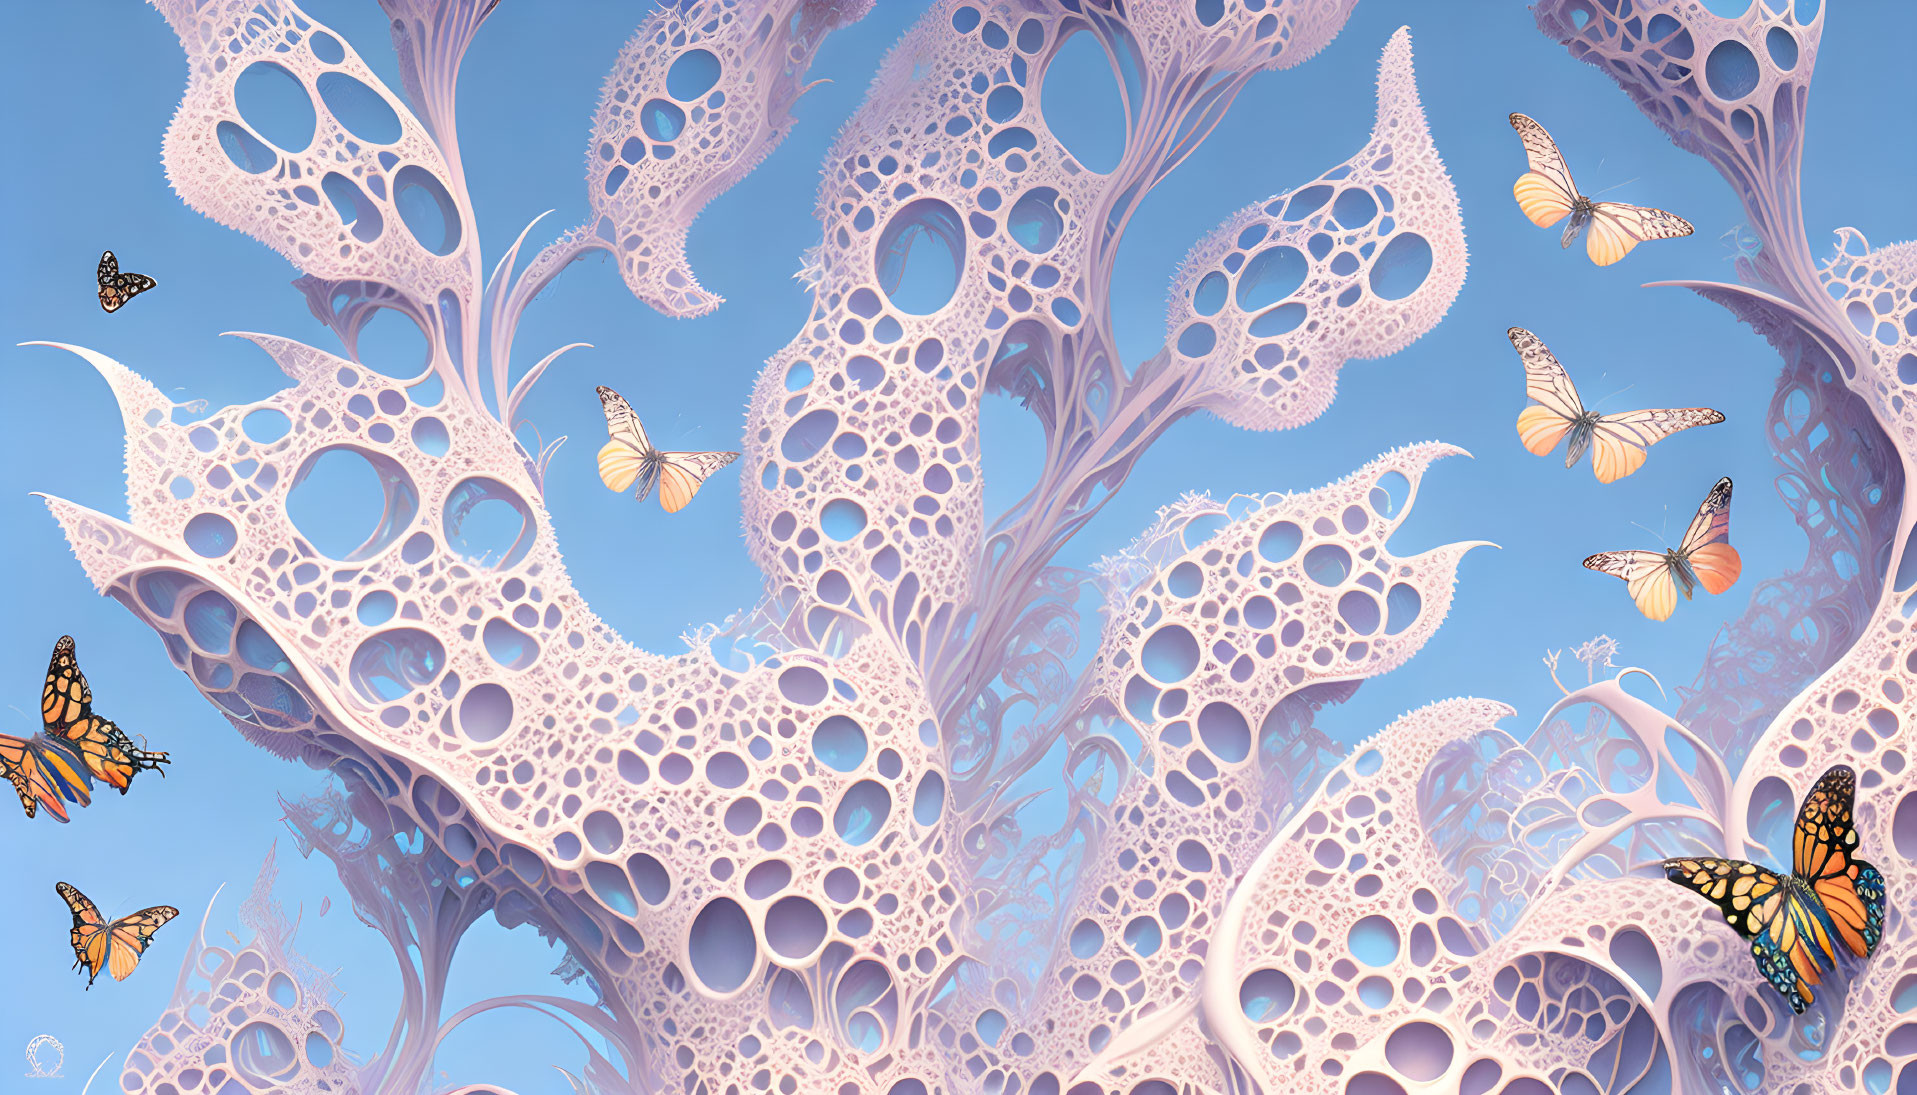 Whimsical illustration of porous coral-like structures with fluttering butterflies against a serene blue sky